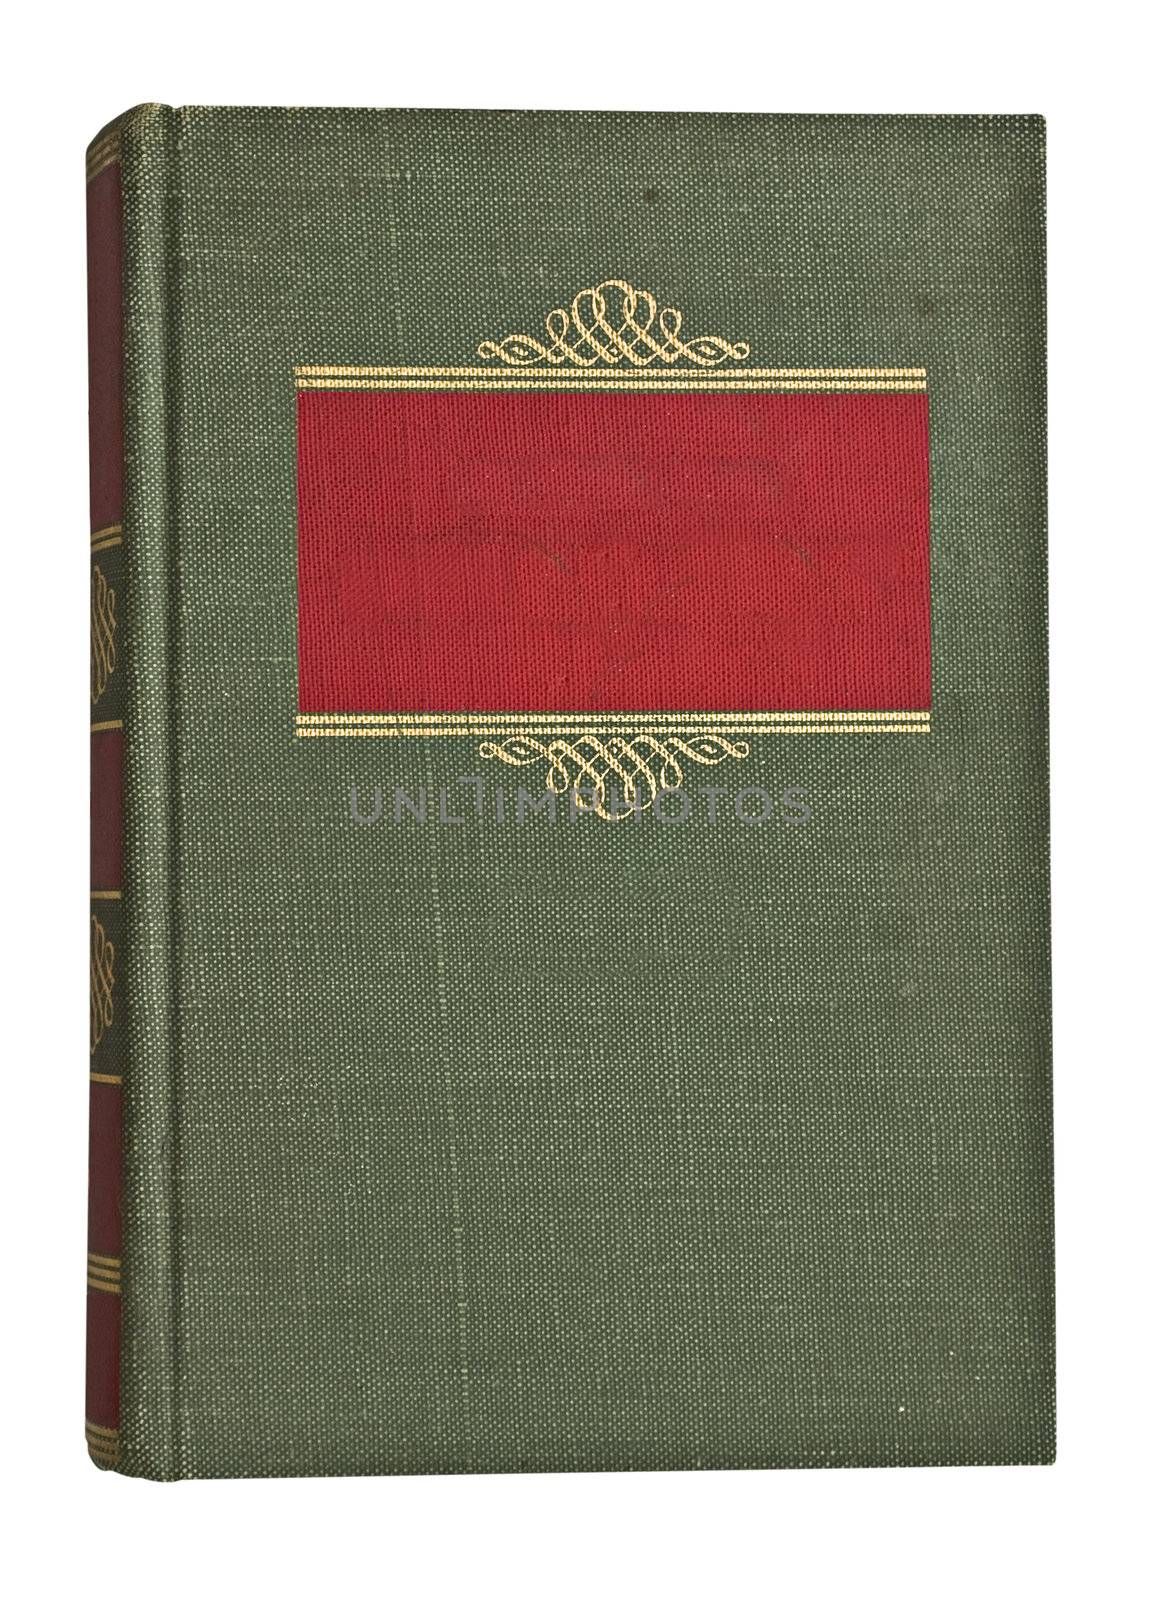 Antique faded green and red book isolated on white